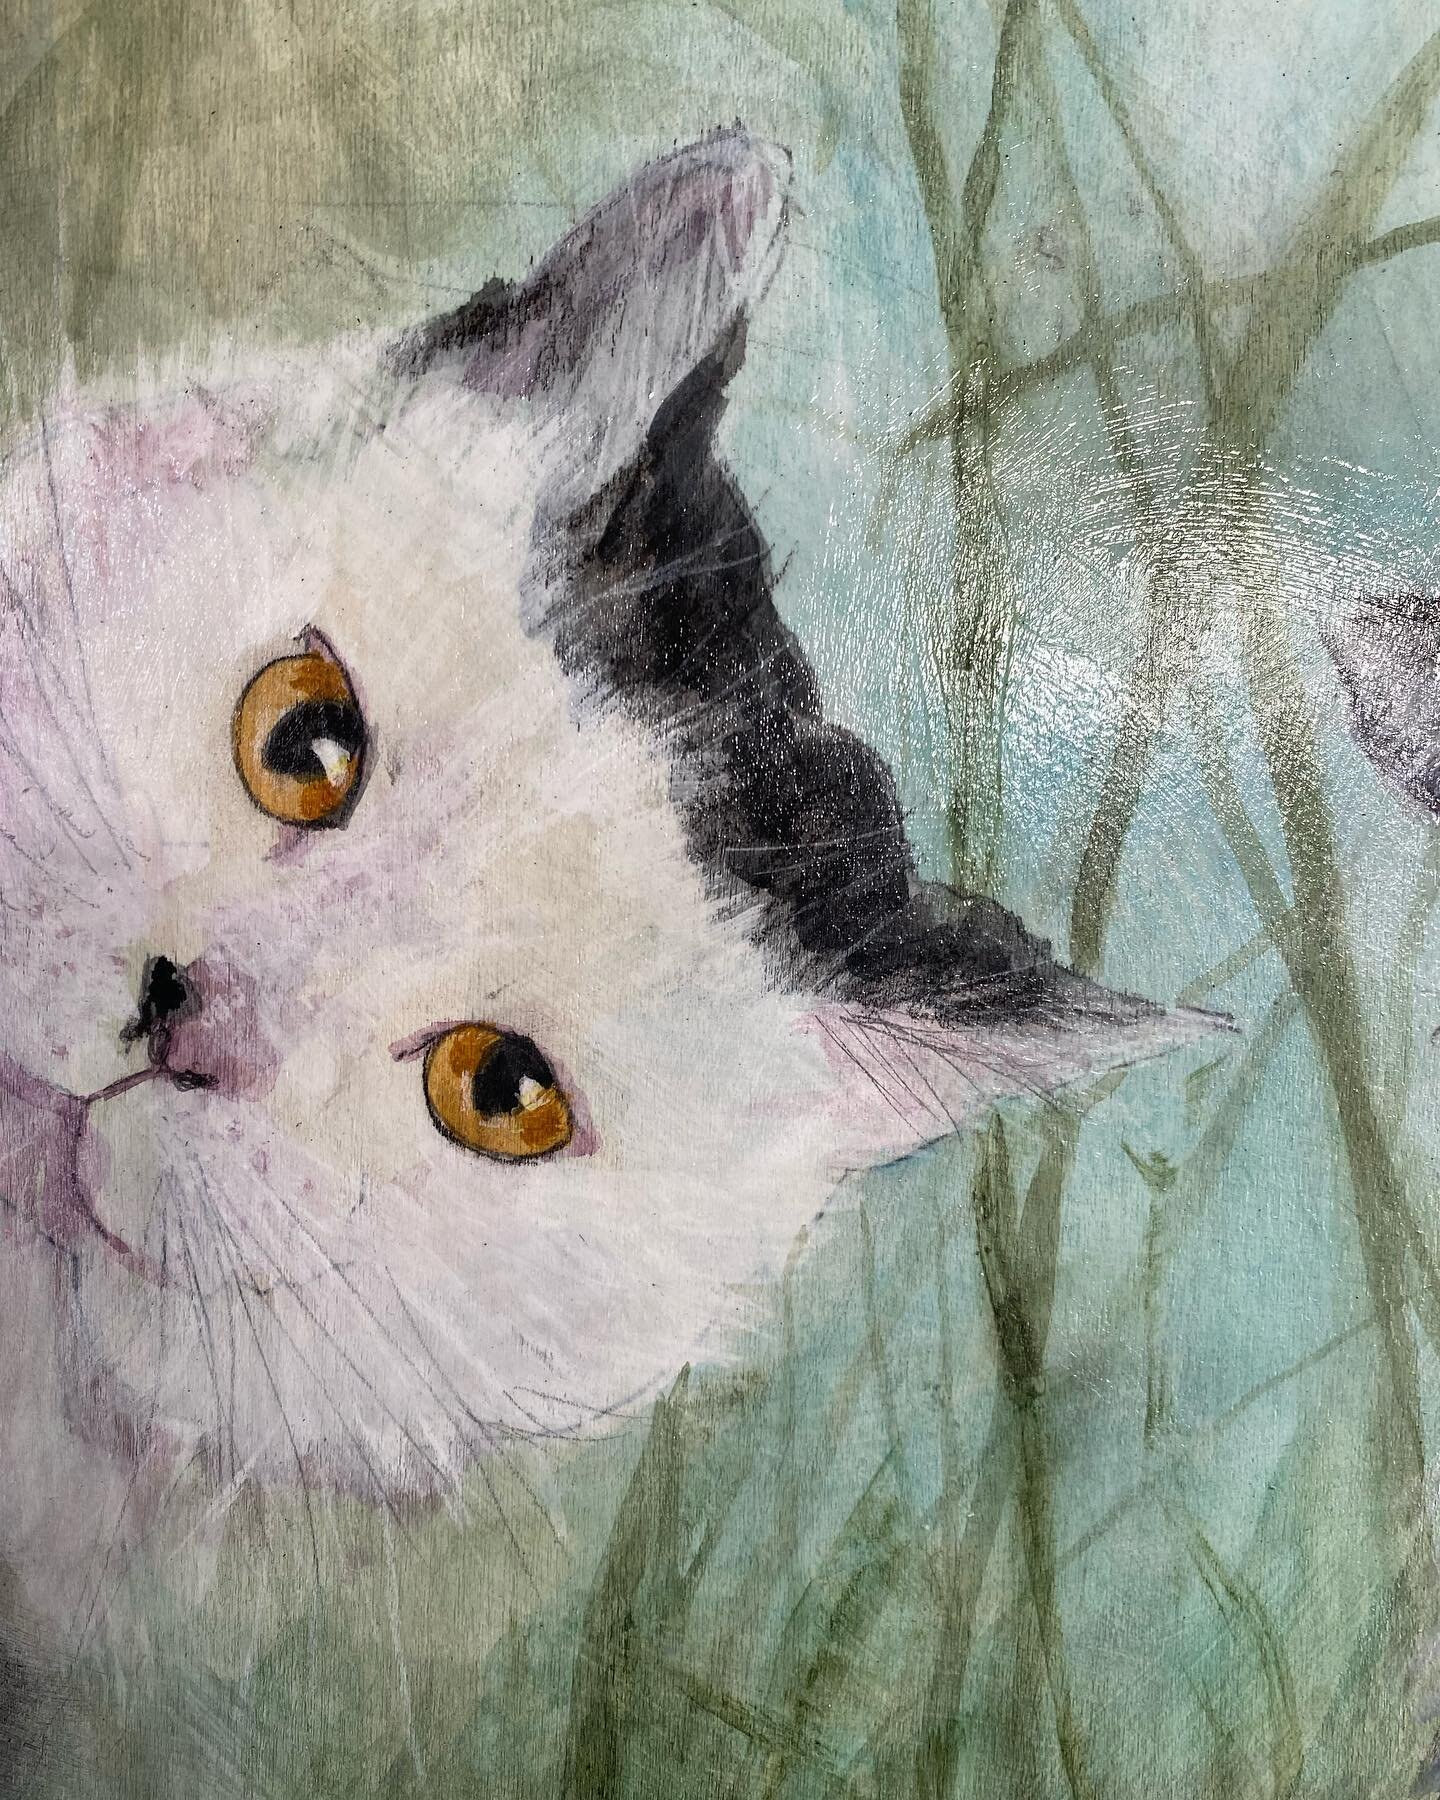 &lsquo;Where&rsquo;s my Breakfast?!&rsquo; Watercolor, charcoal and acrylic on panel - Christmas commission finished today - I love the part where you paint the little highlight in the eyes and they completely come to life! 😻😻🎅🏻🎁 meow!!! 

#petp